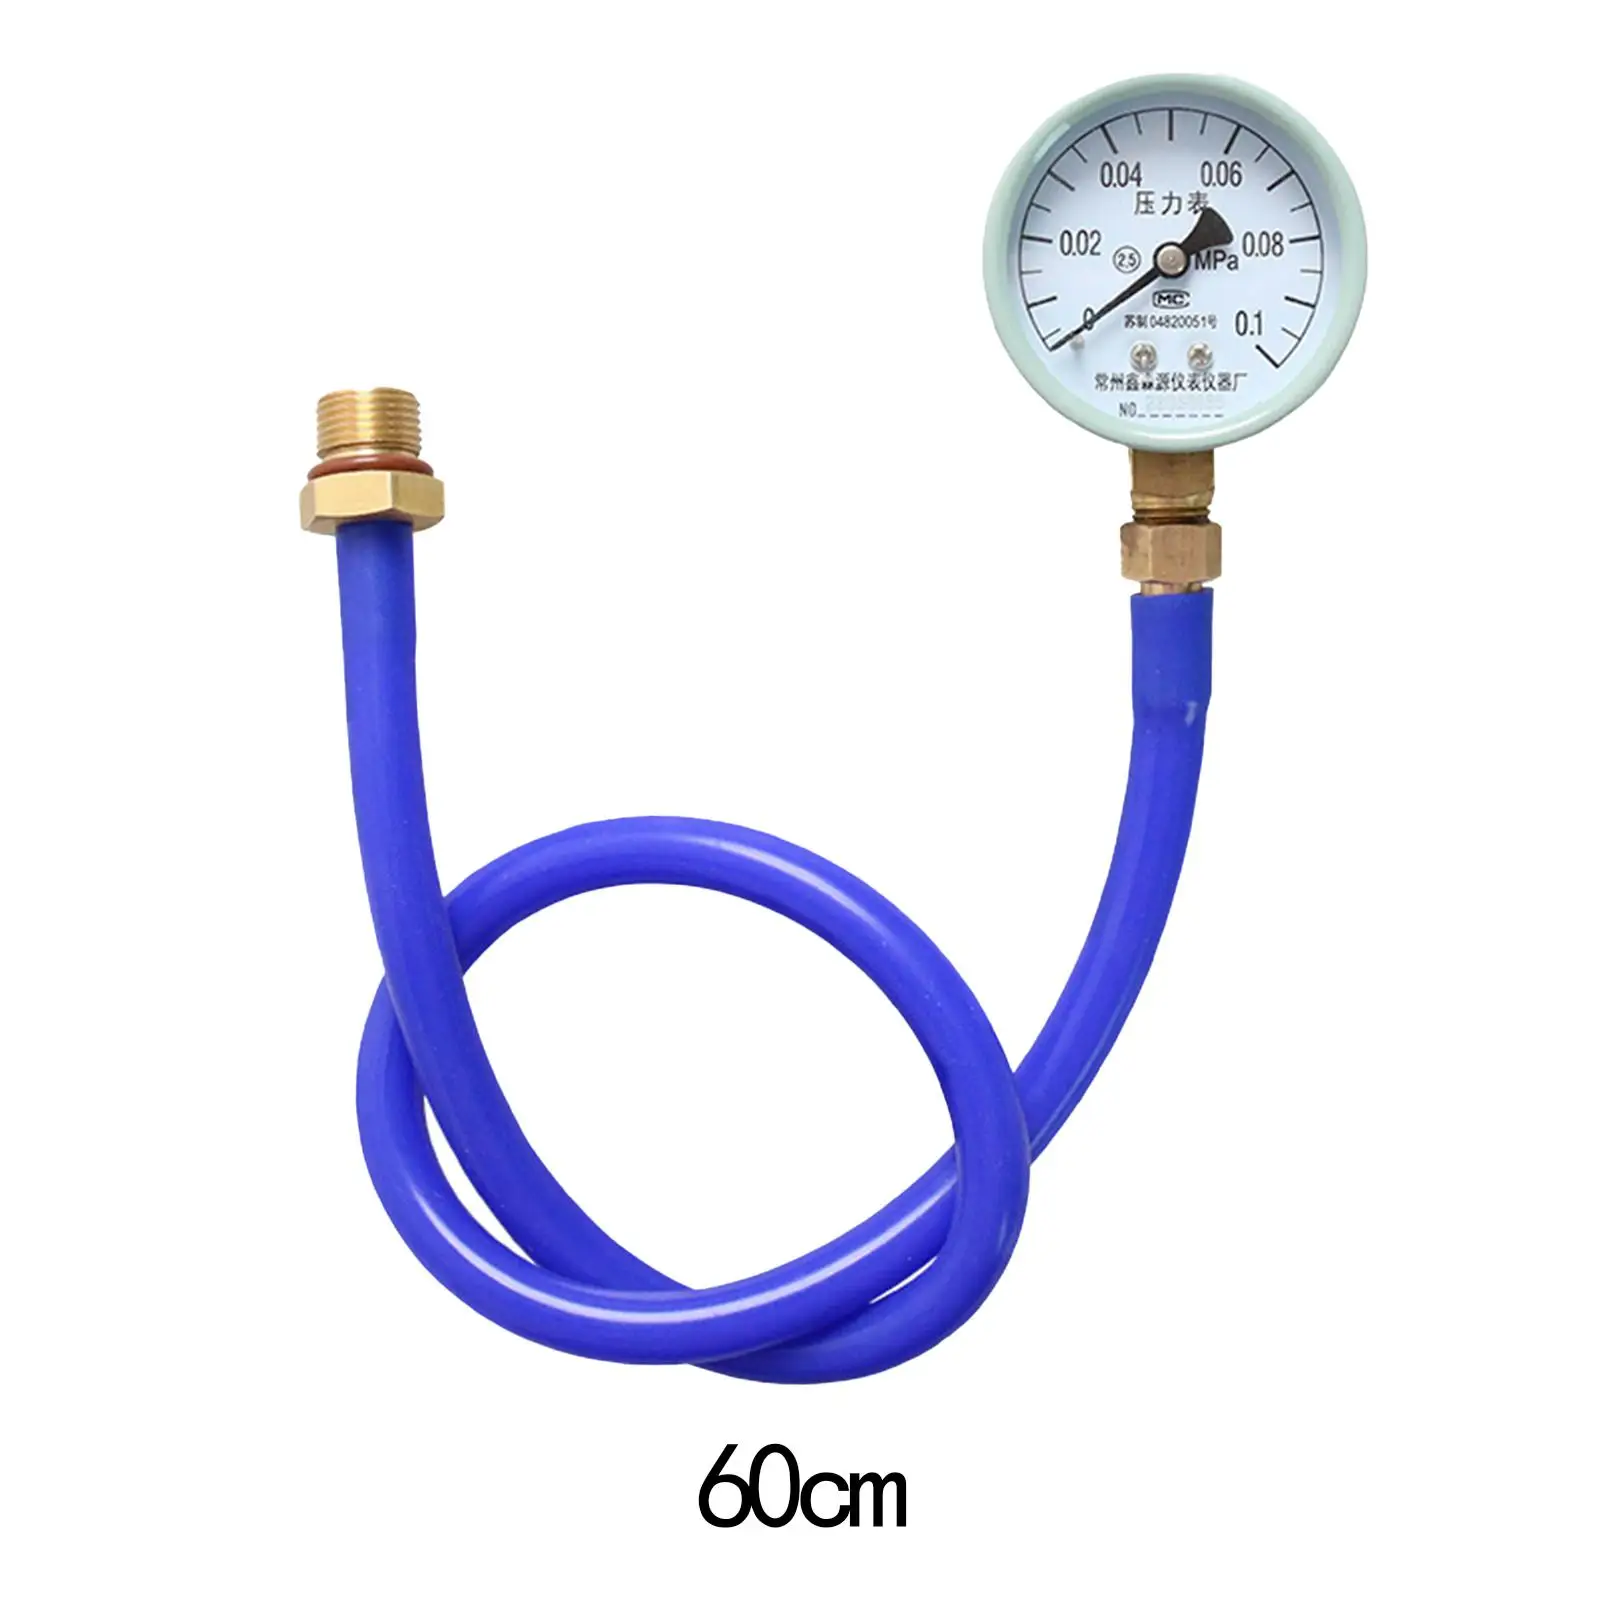 Exhaust Back Pressure Tester Car Repairs Tool Professional Pressure Gauge Universal for Automobile Vehicles Automotive Car